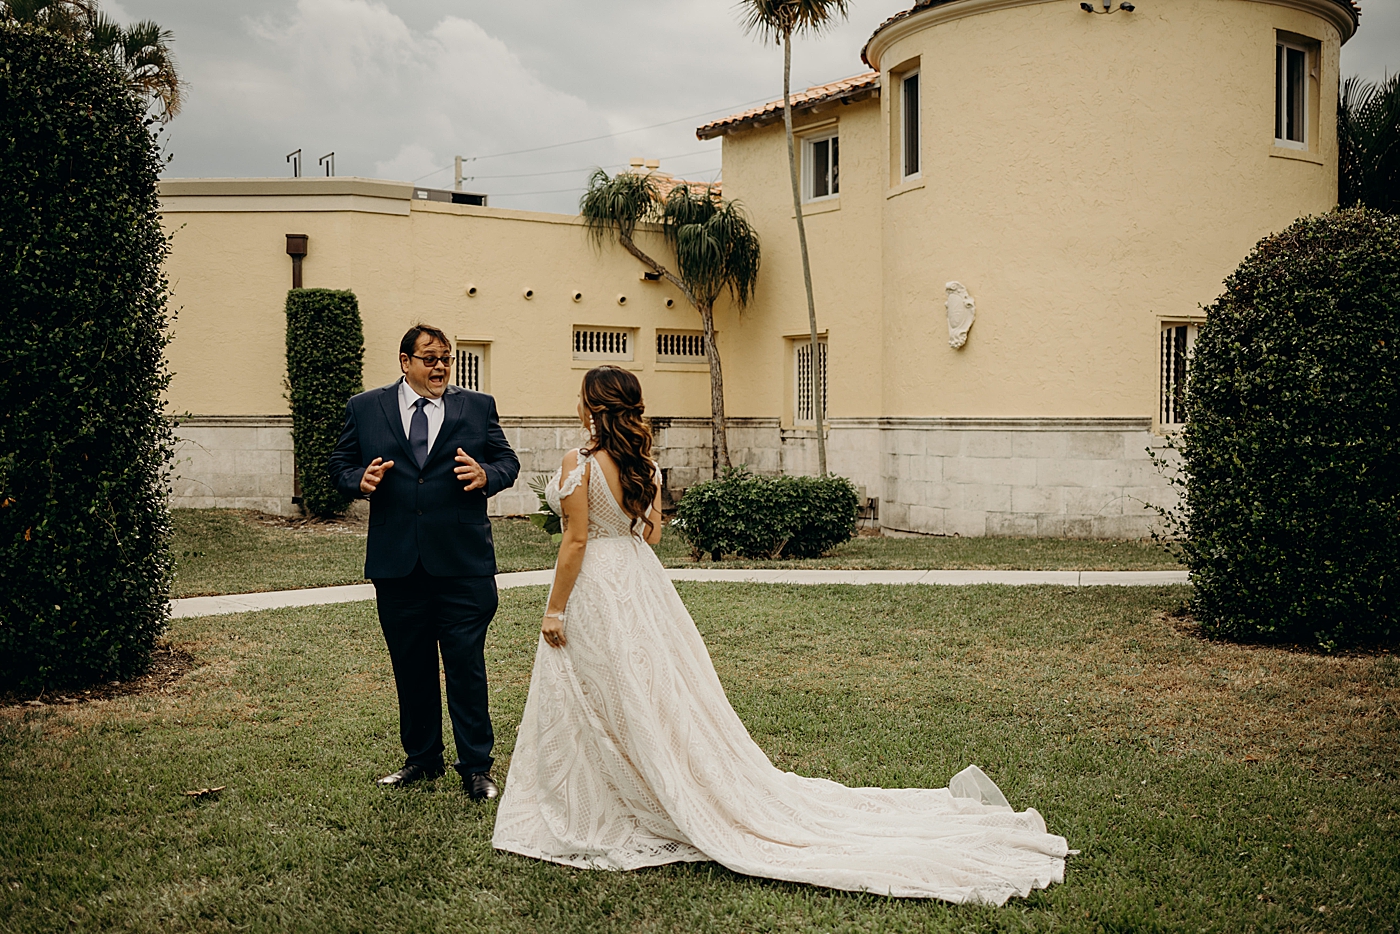 Father's first look reaction to seeing Bride in dress Benvenuto Restaurant Wedding Photography captured by South Florida Wedding Photographer Maggie Alvarez Photography